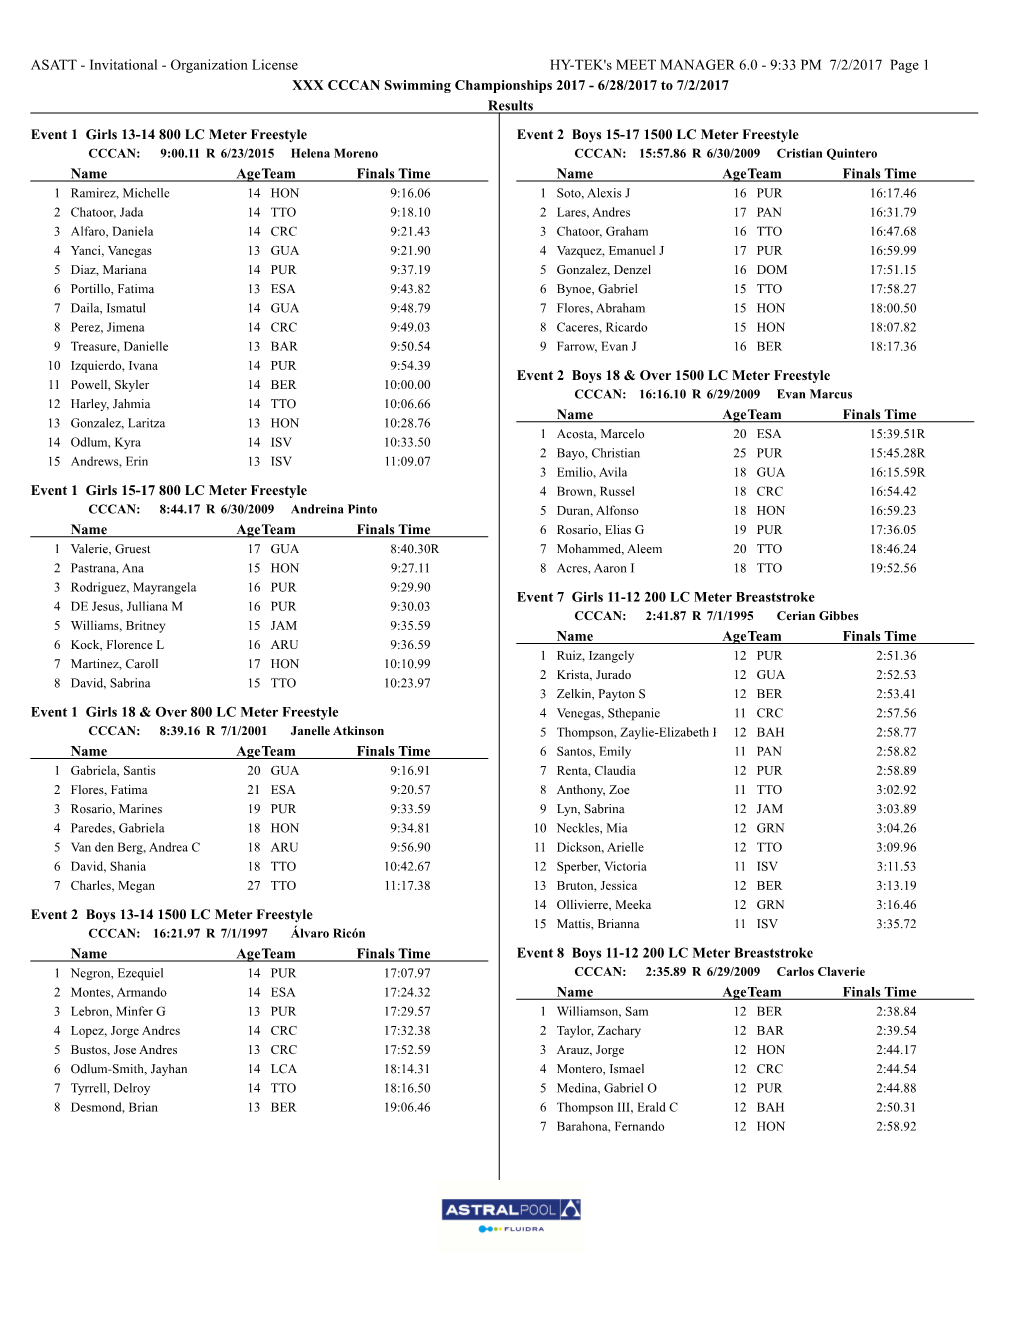 ASATT - Invitational - Organization License HY-TEK's MEET MANAGER 6.0 - 9:33 PM 7/2/2017 Page 1 XXX CCCAN Swimming Championships 2017 - 6/28/2017 to 7/2/2017 Results